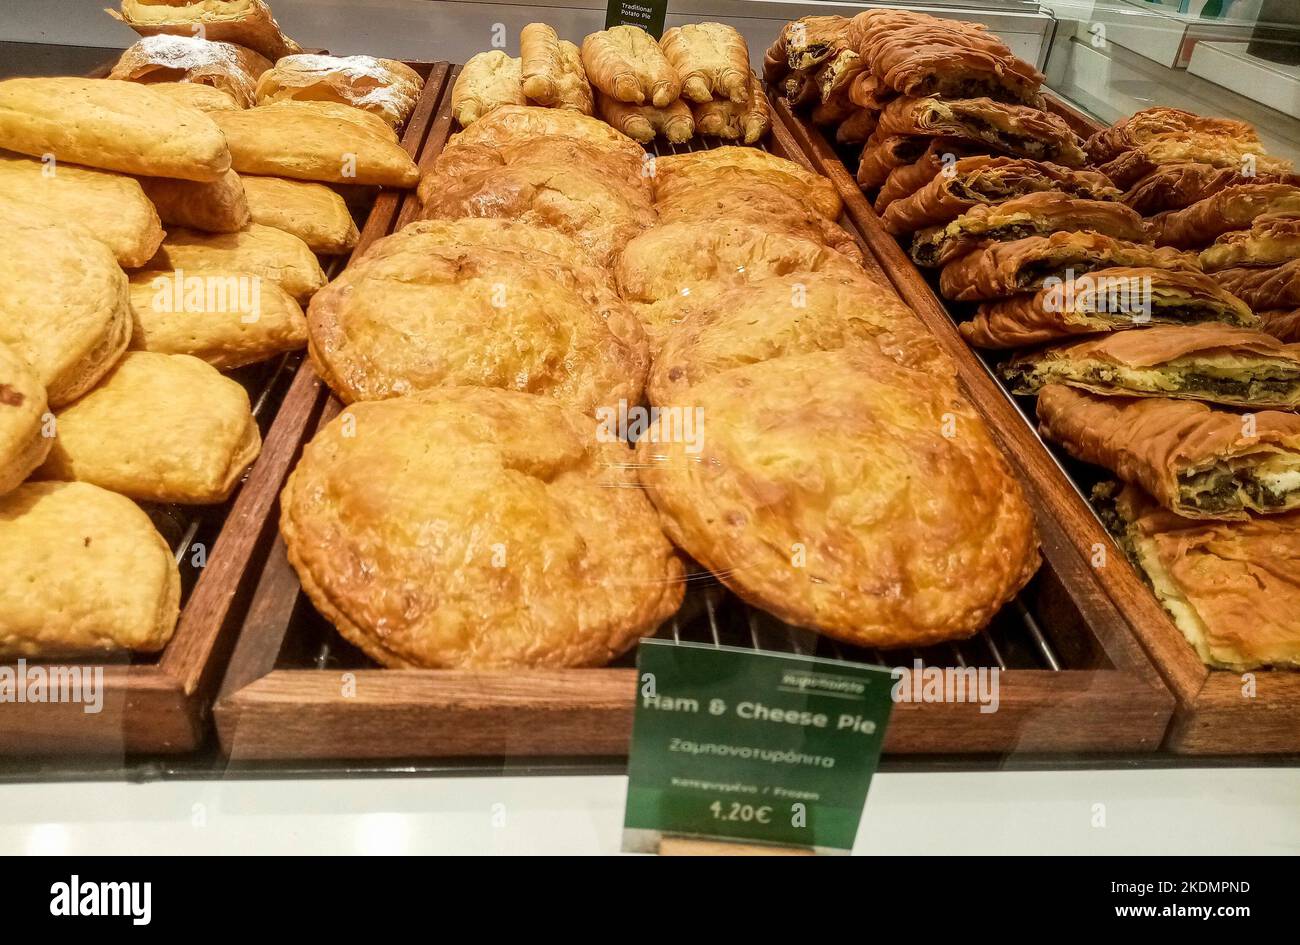 Freshly baked Greek spinach pie and ham cheese pie lined up for sale in a Greece local food shop. Stock Photo